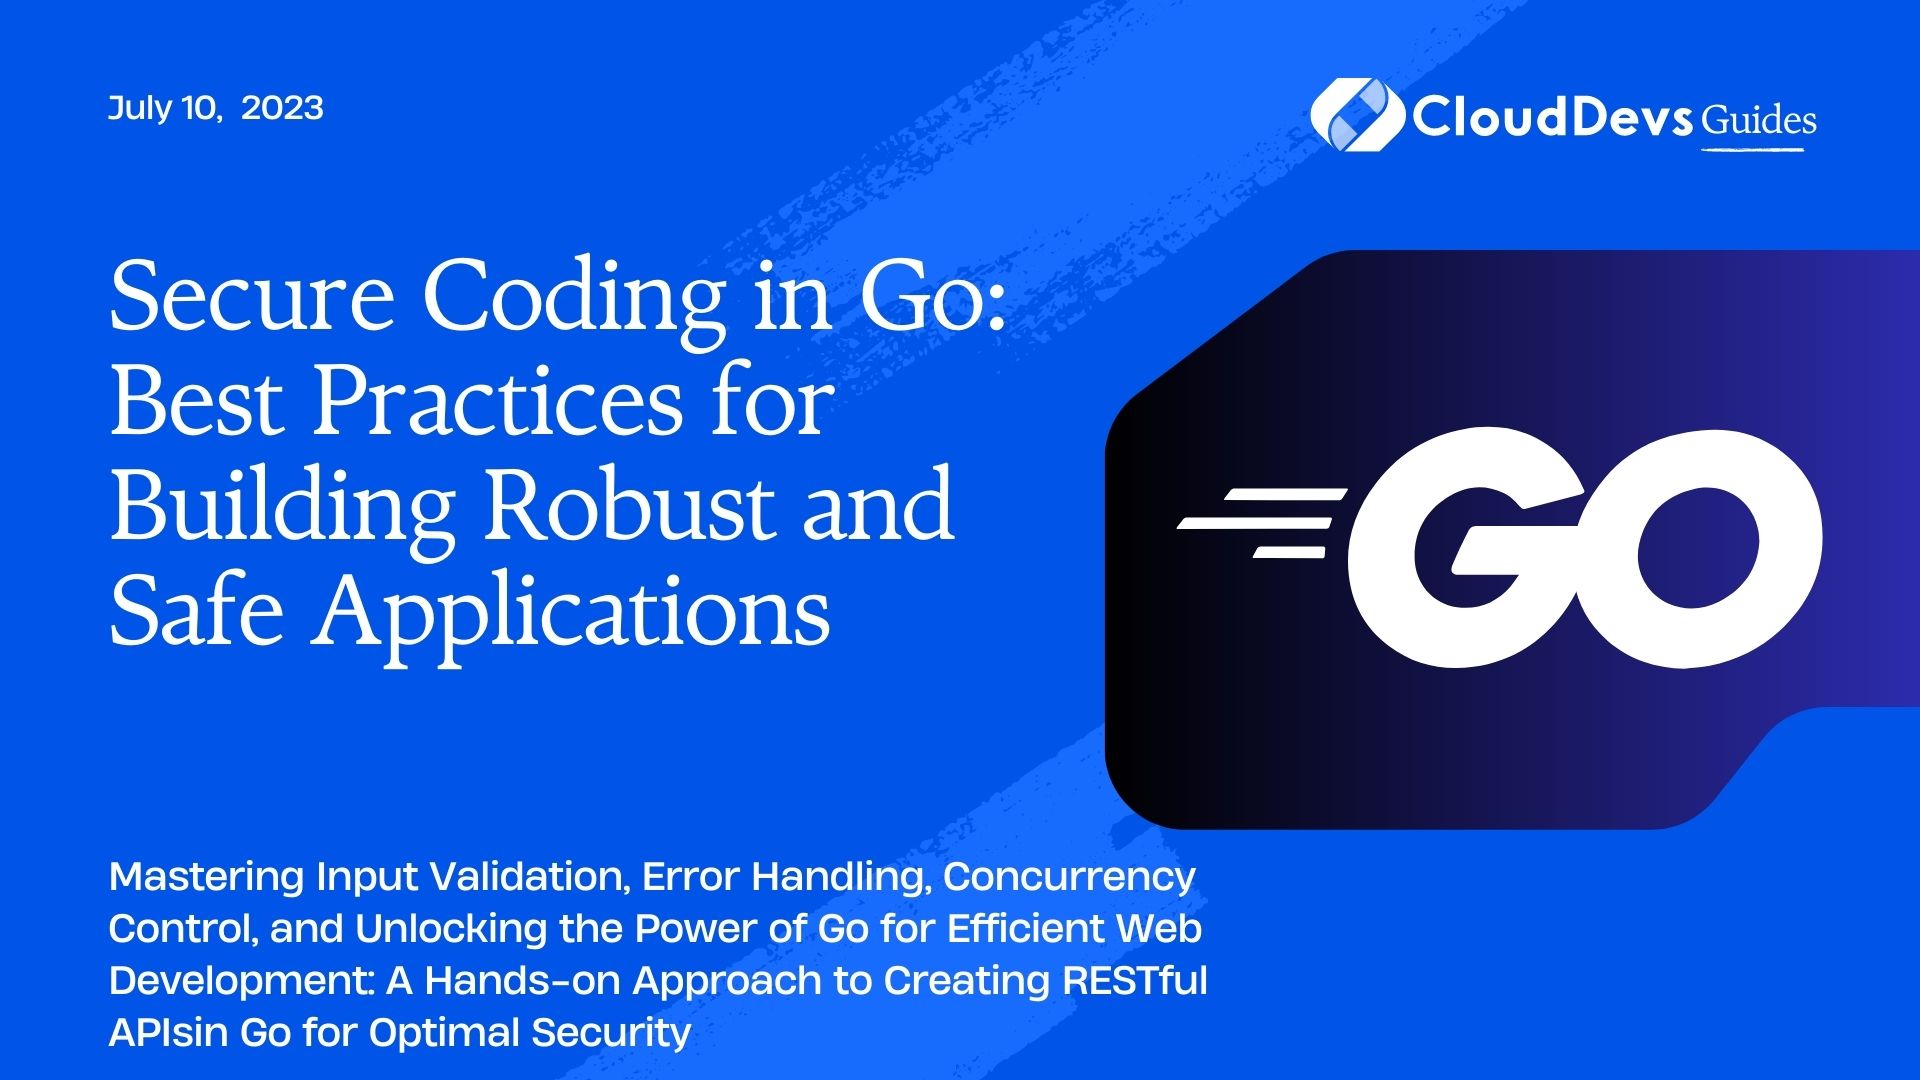 Secure Coding in Go: Best Practices for Building Robust and Safe Applications